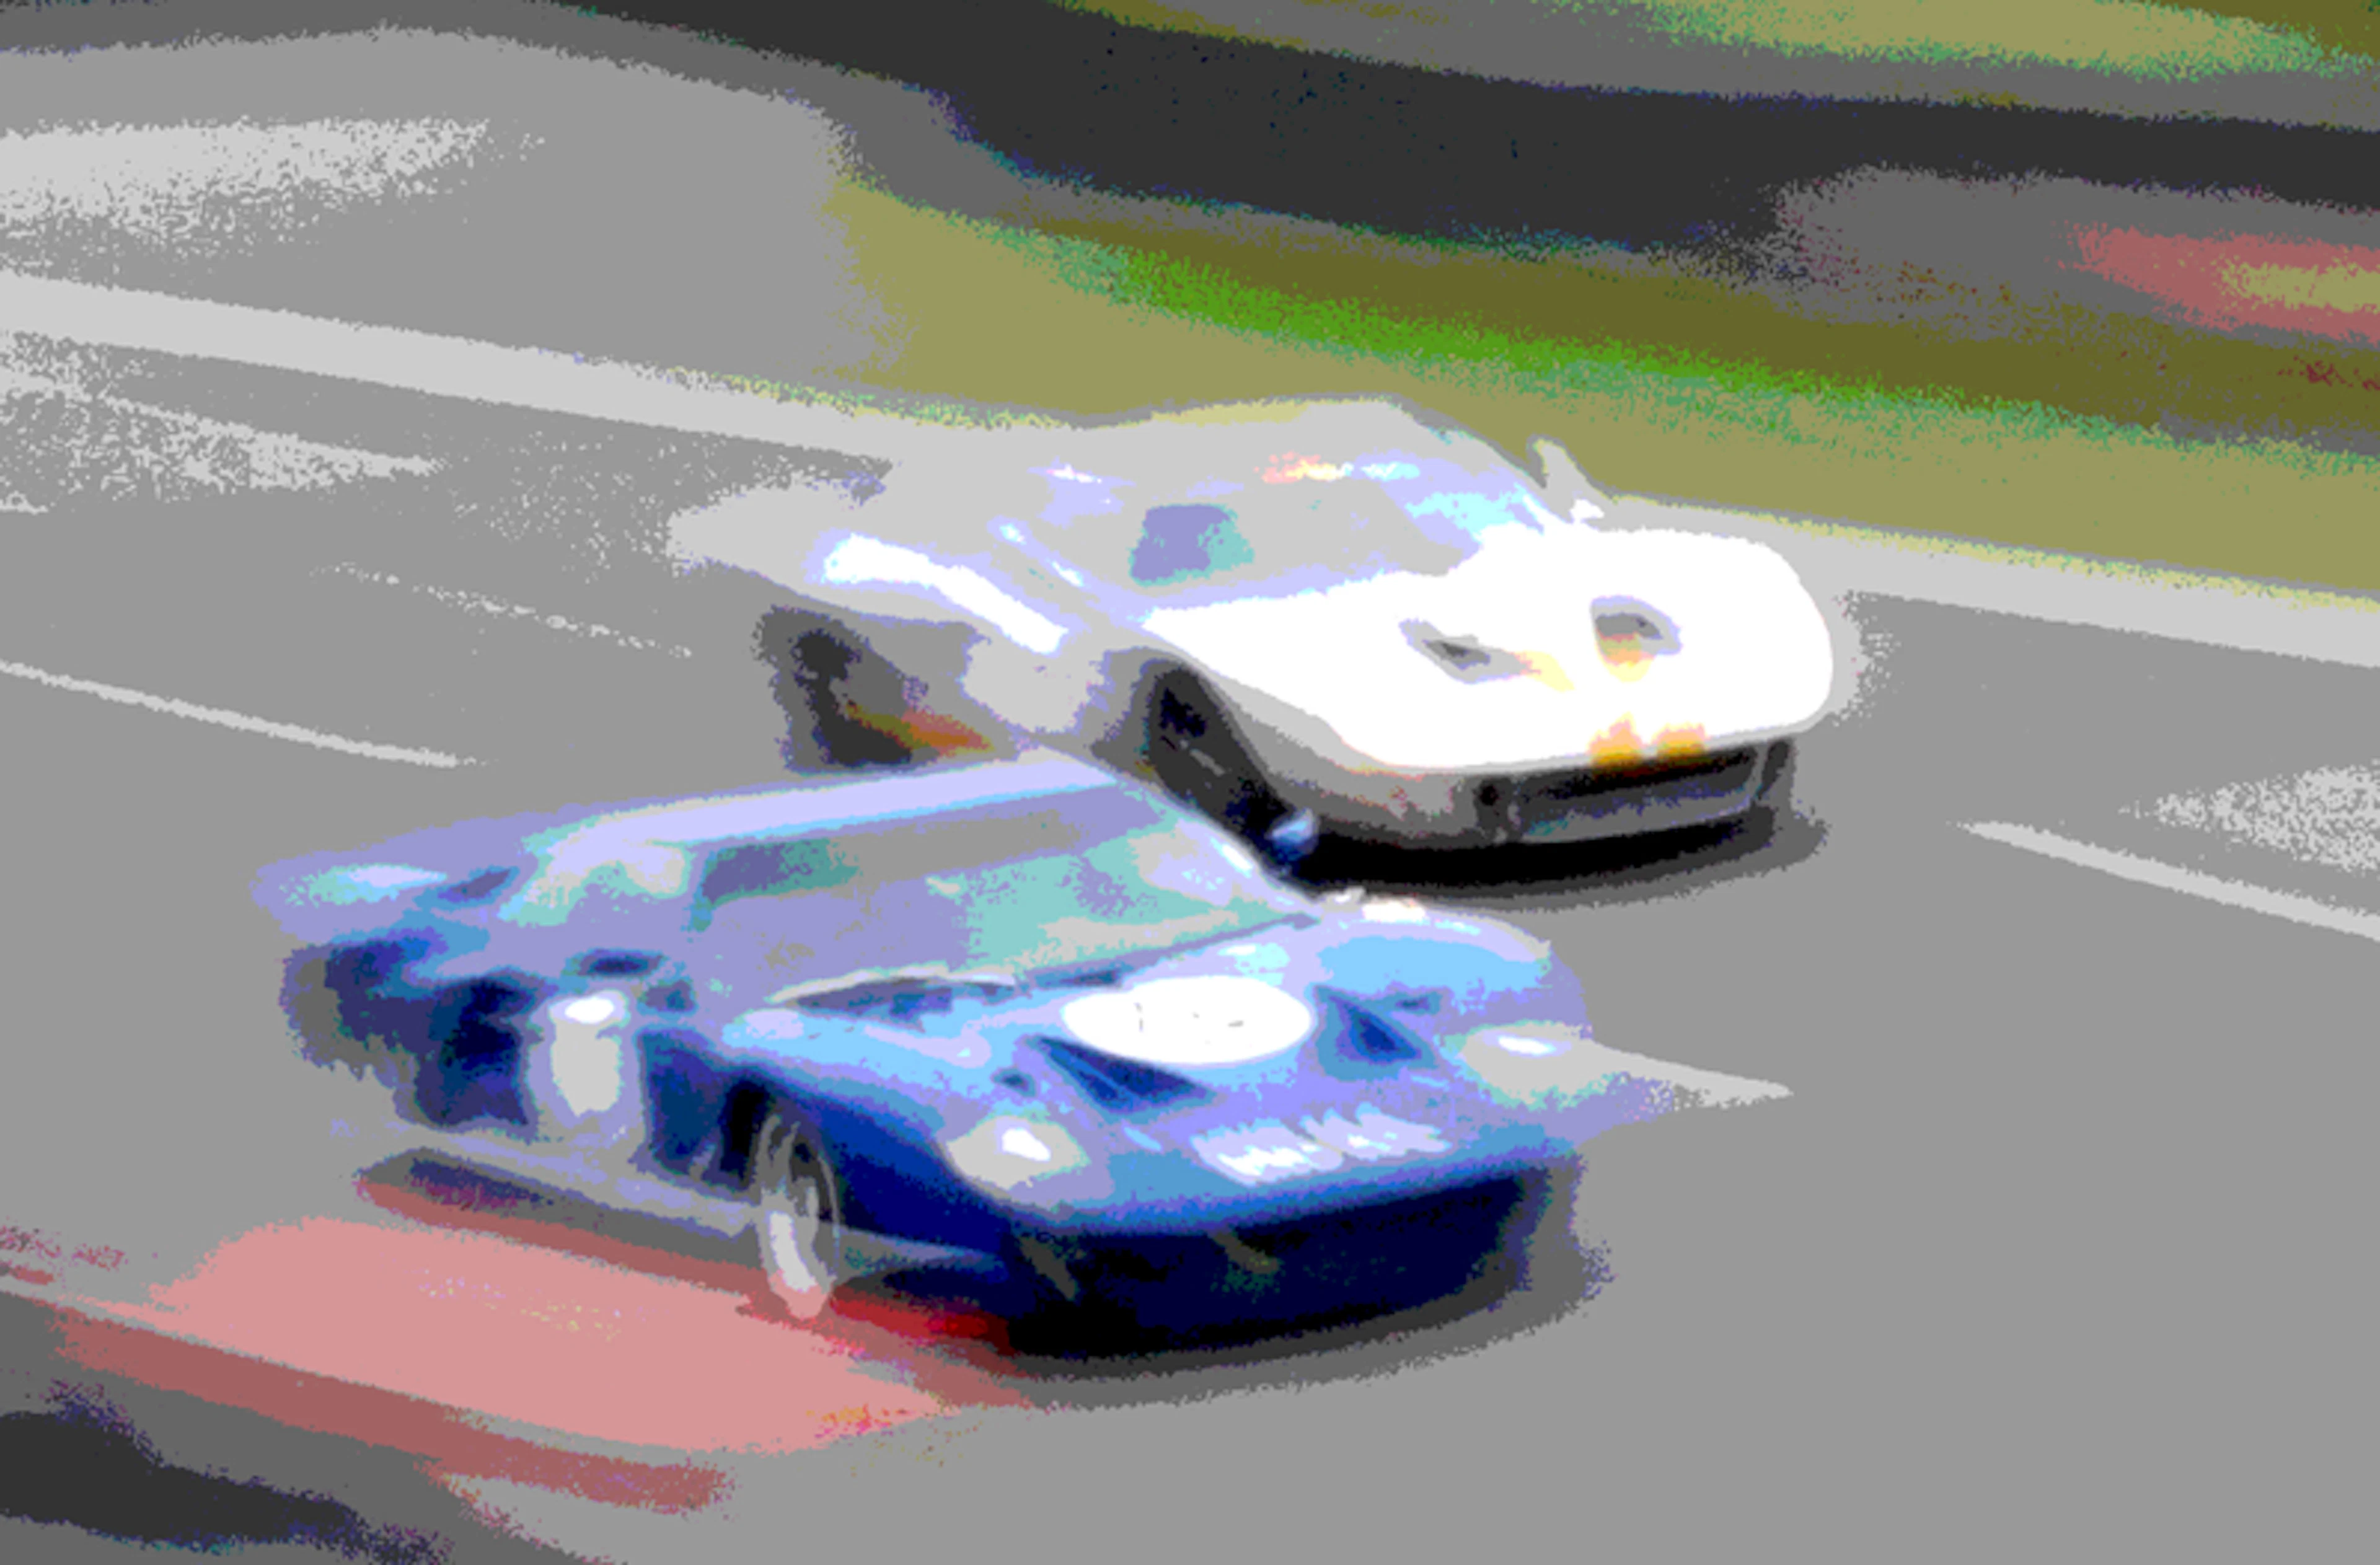 The dualing GT40s